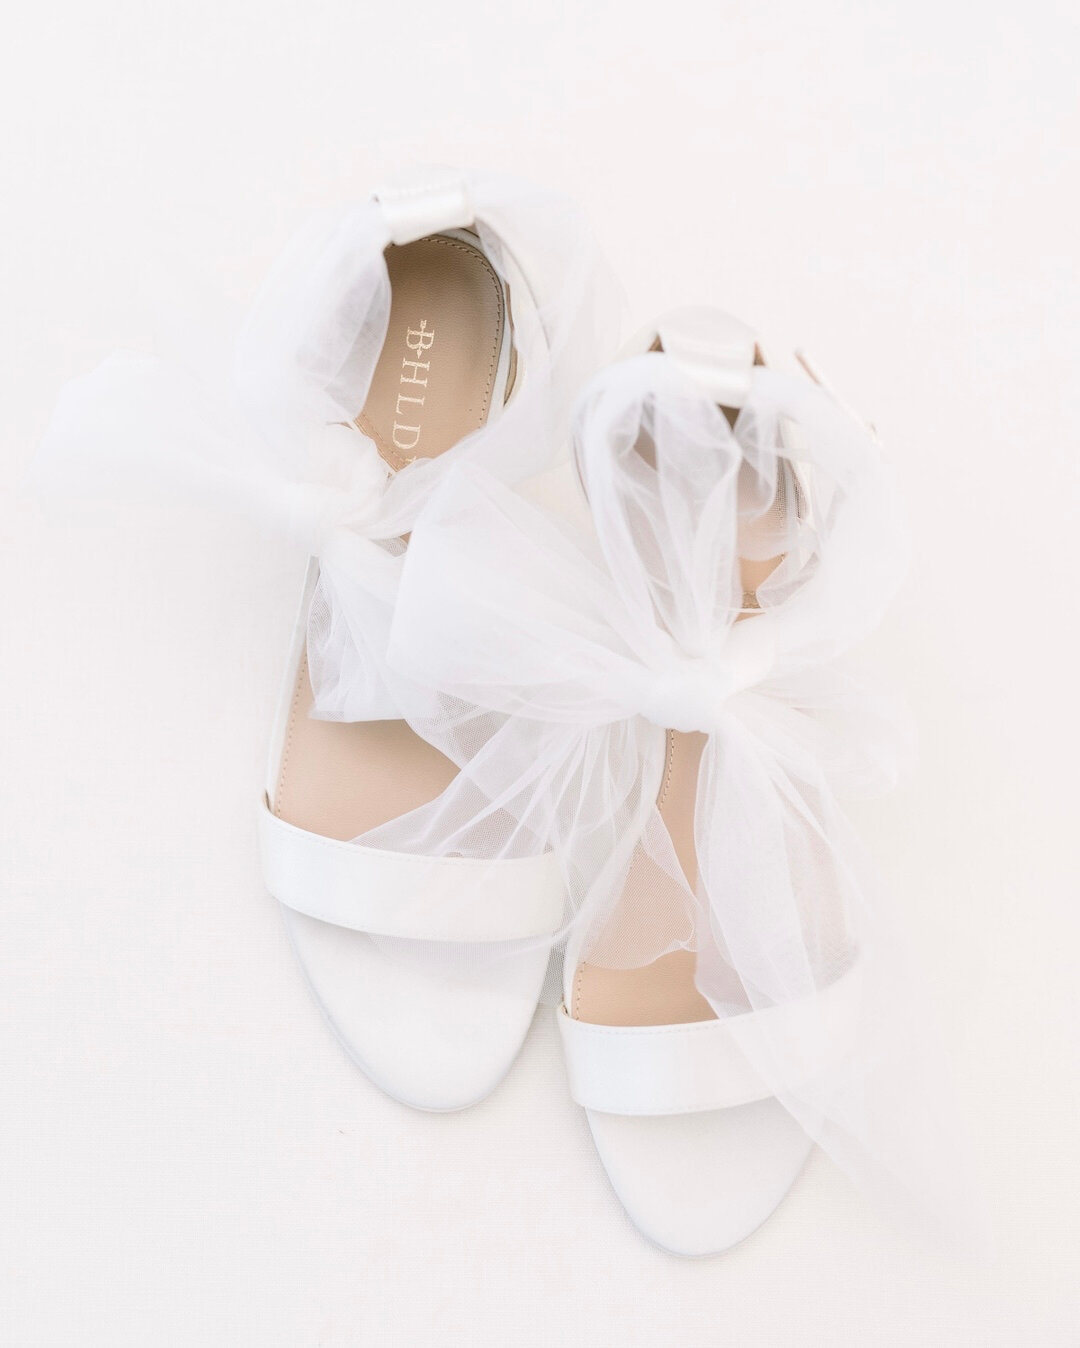 Shoes but make it classic and ethereal&lt;3